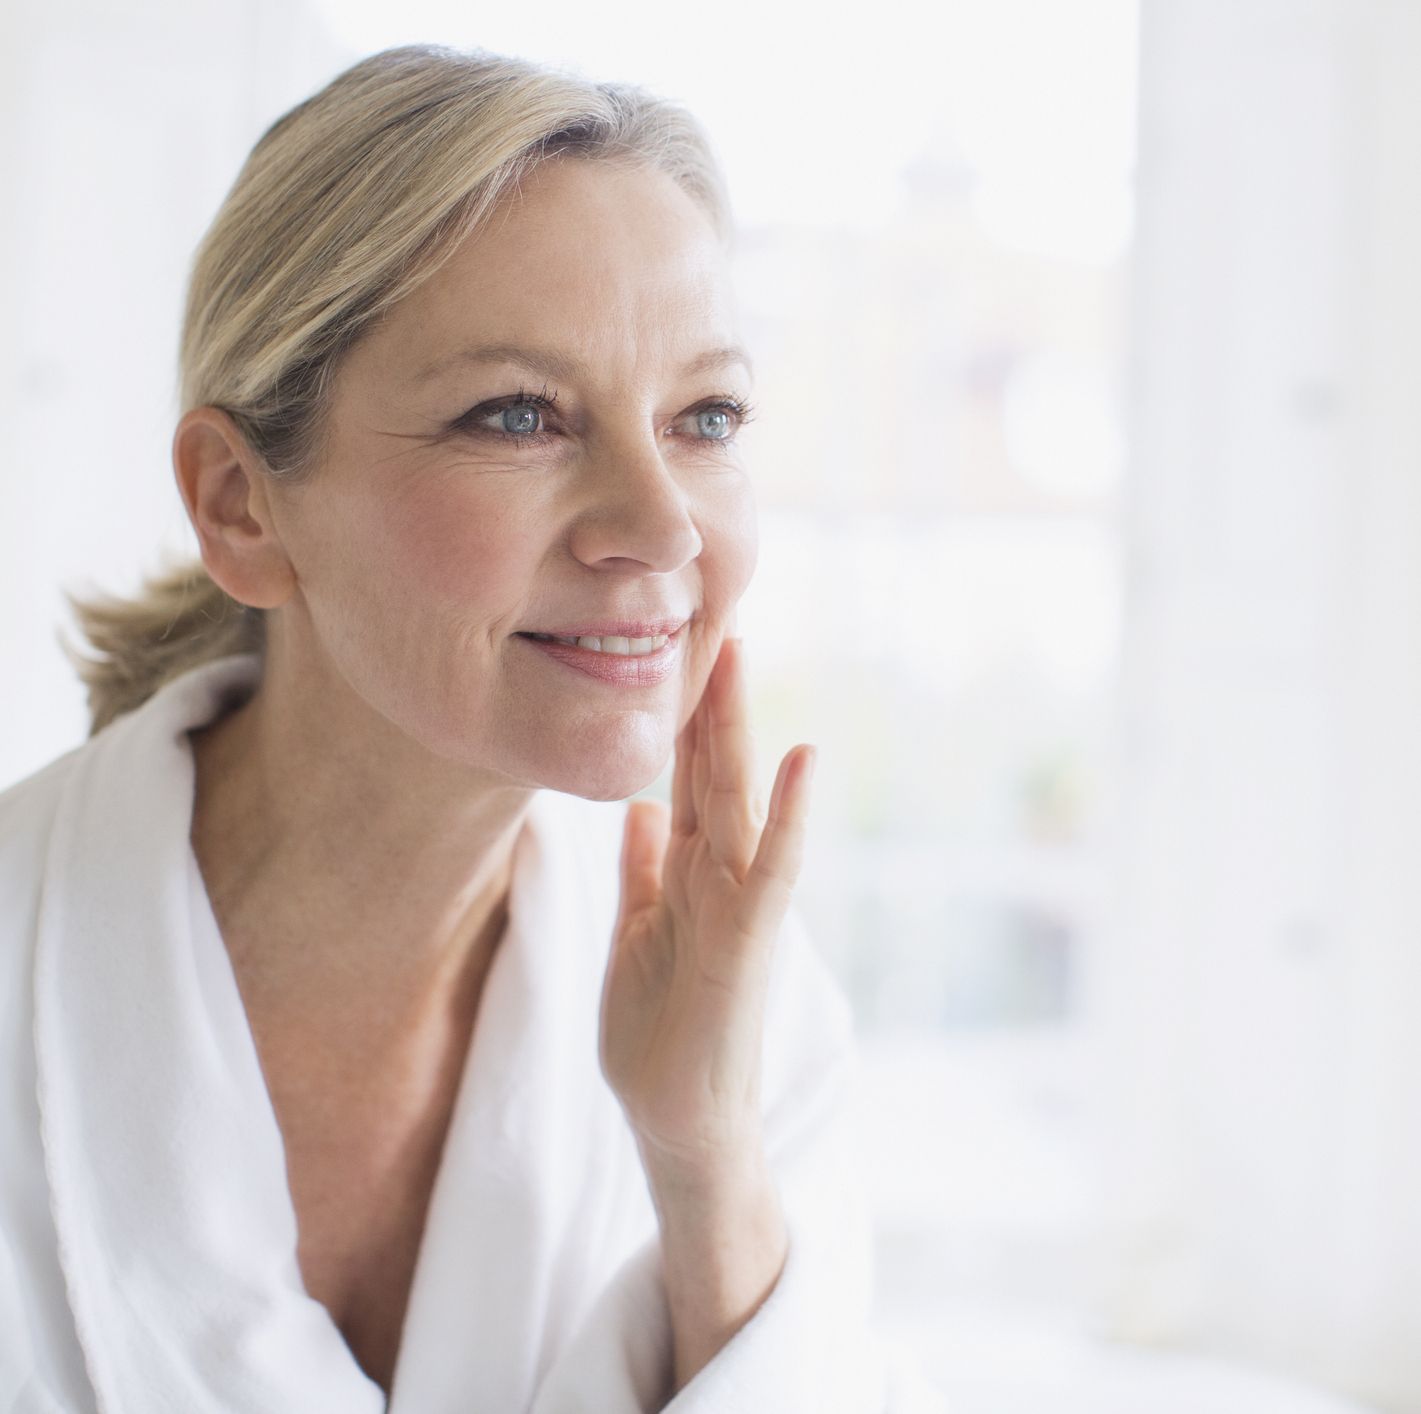 Smiling mature woman applying moisturizer to face at bathroom mirror